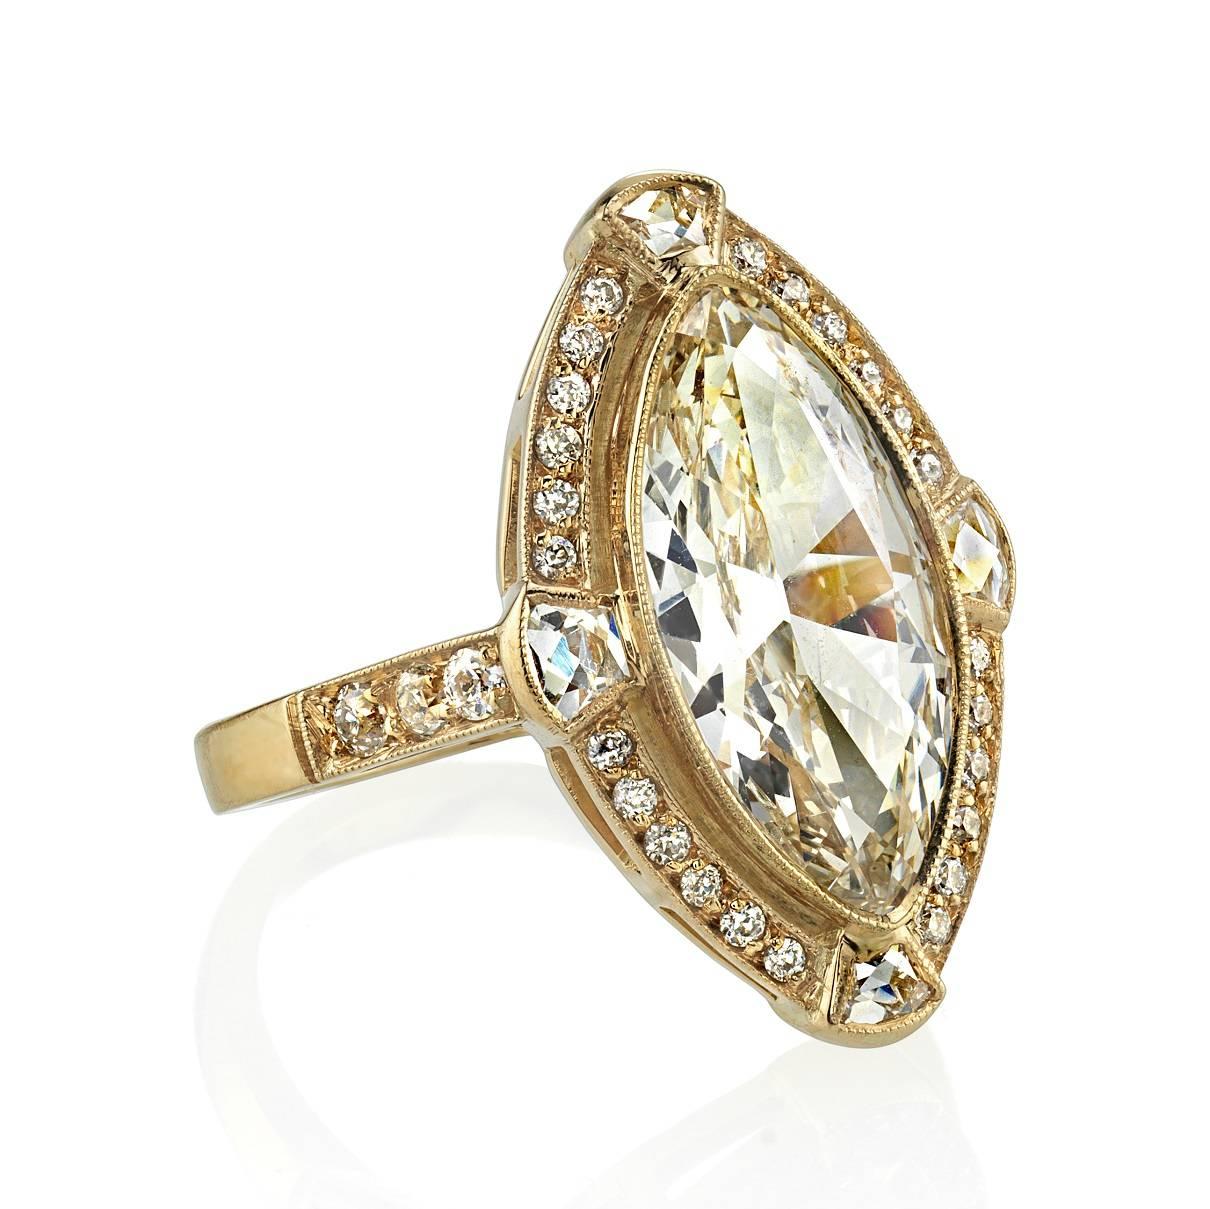 2.77ct K/VS1 GIA certified Moval cut diamond set in a handcrafted 18k yellow gold mounting. 